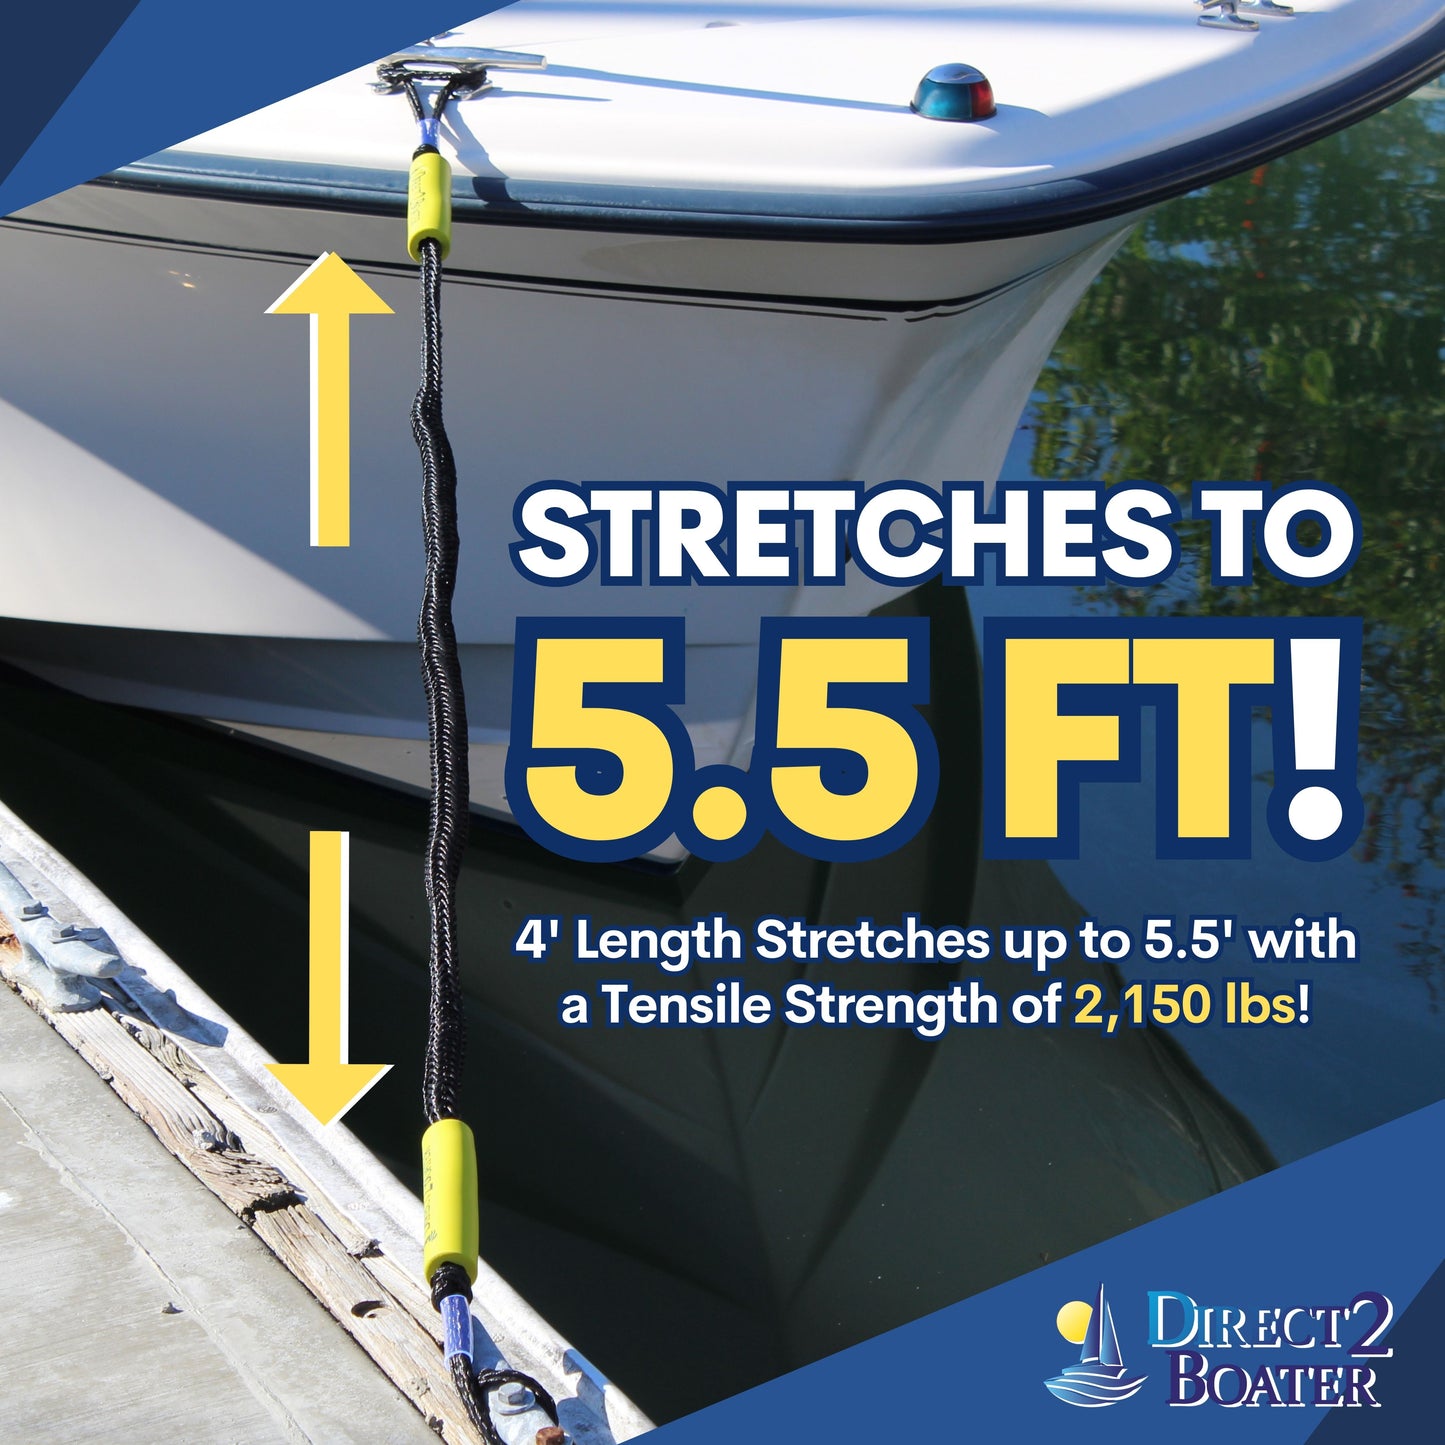 4' Bungee Dock Line - Black - Stretches to 5.5' - Ideal for Boats, PWC, Jet Ski, Dinghy, Kayak & Pontoon up to 4000#